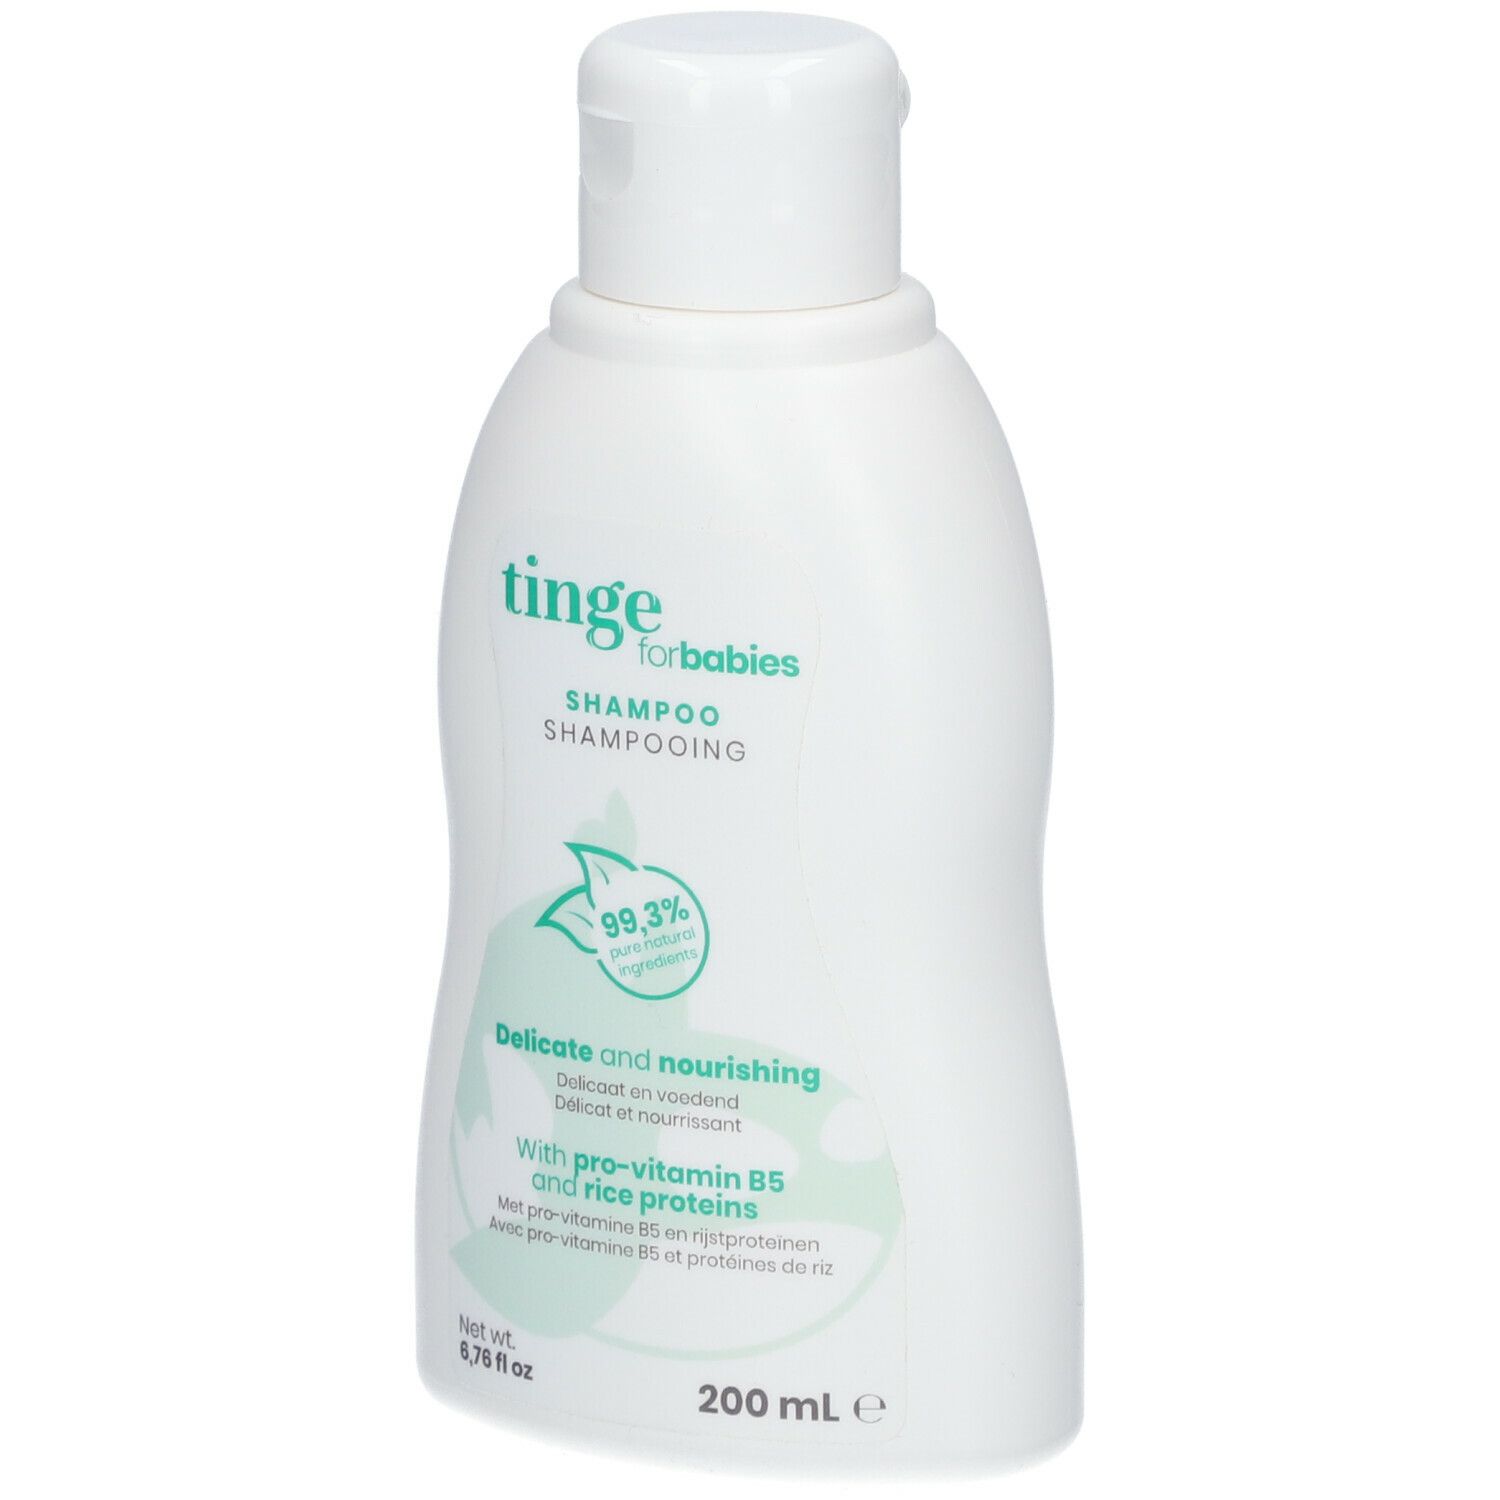 Tinge for Babies Shampooing